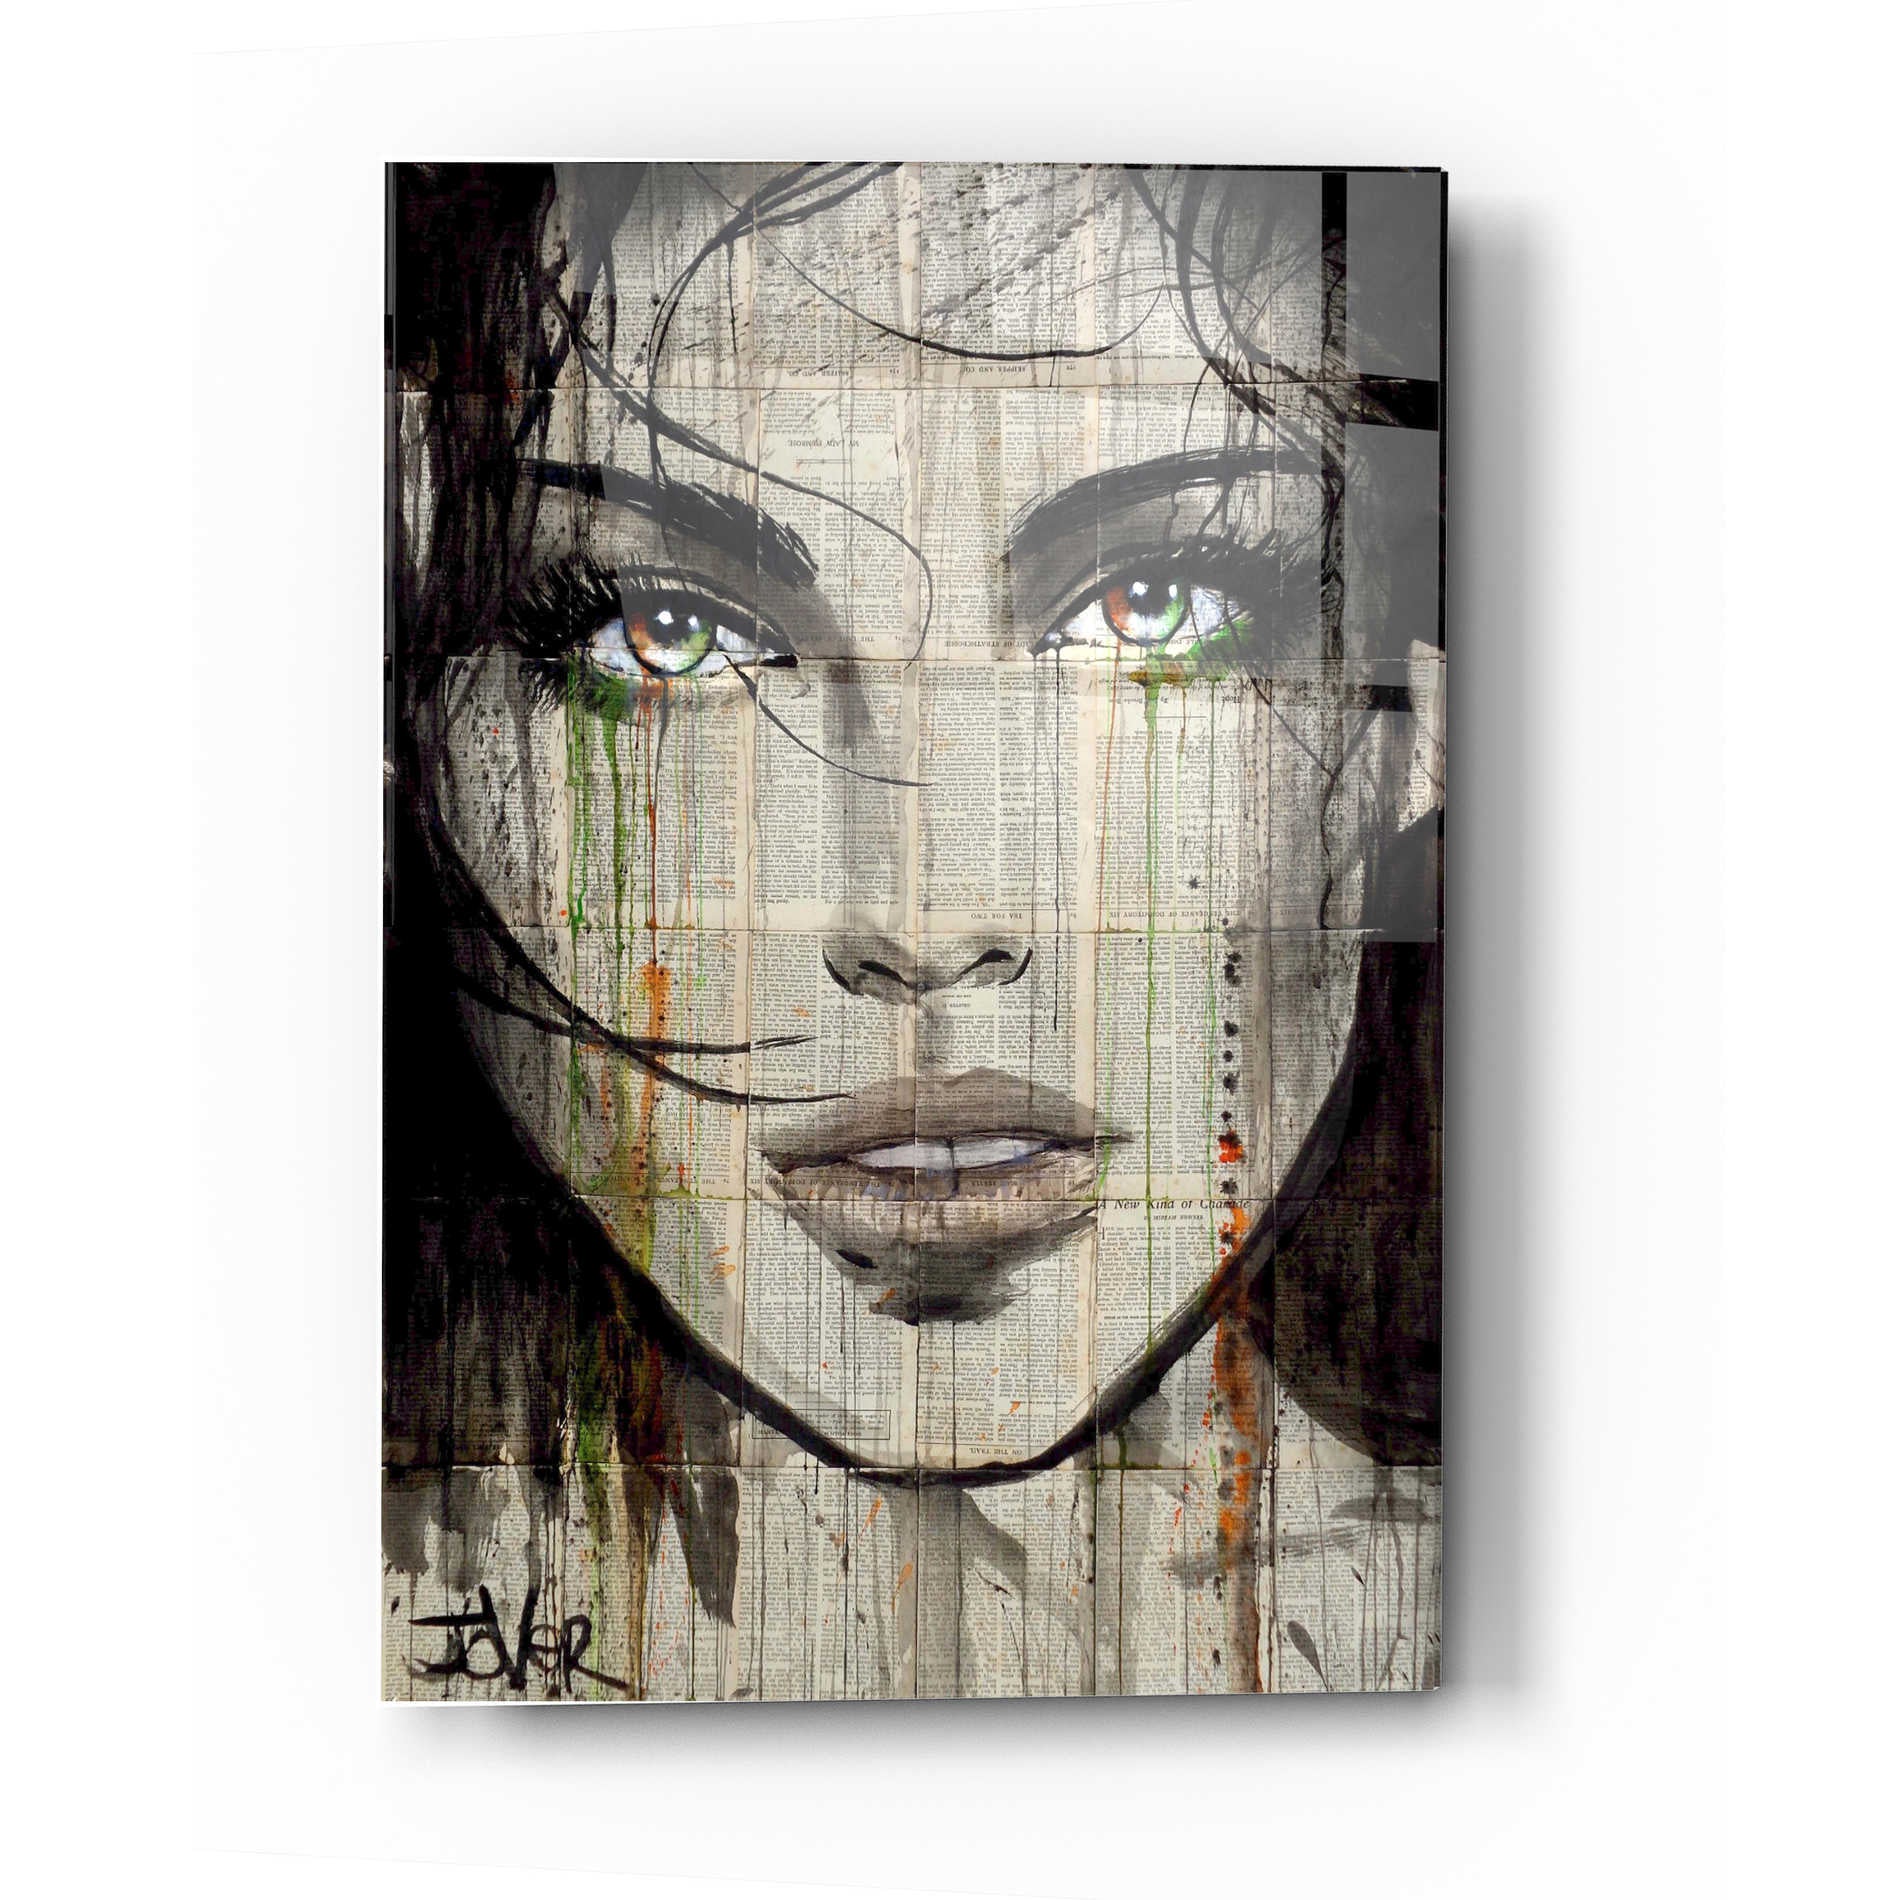 Epic Art 'Another Kind' by Loui Jover, Acrylic Glass Wall Art,16x24